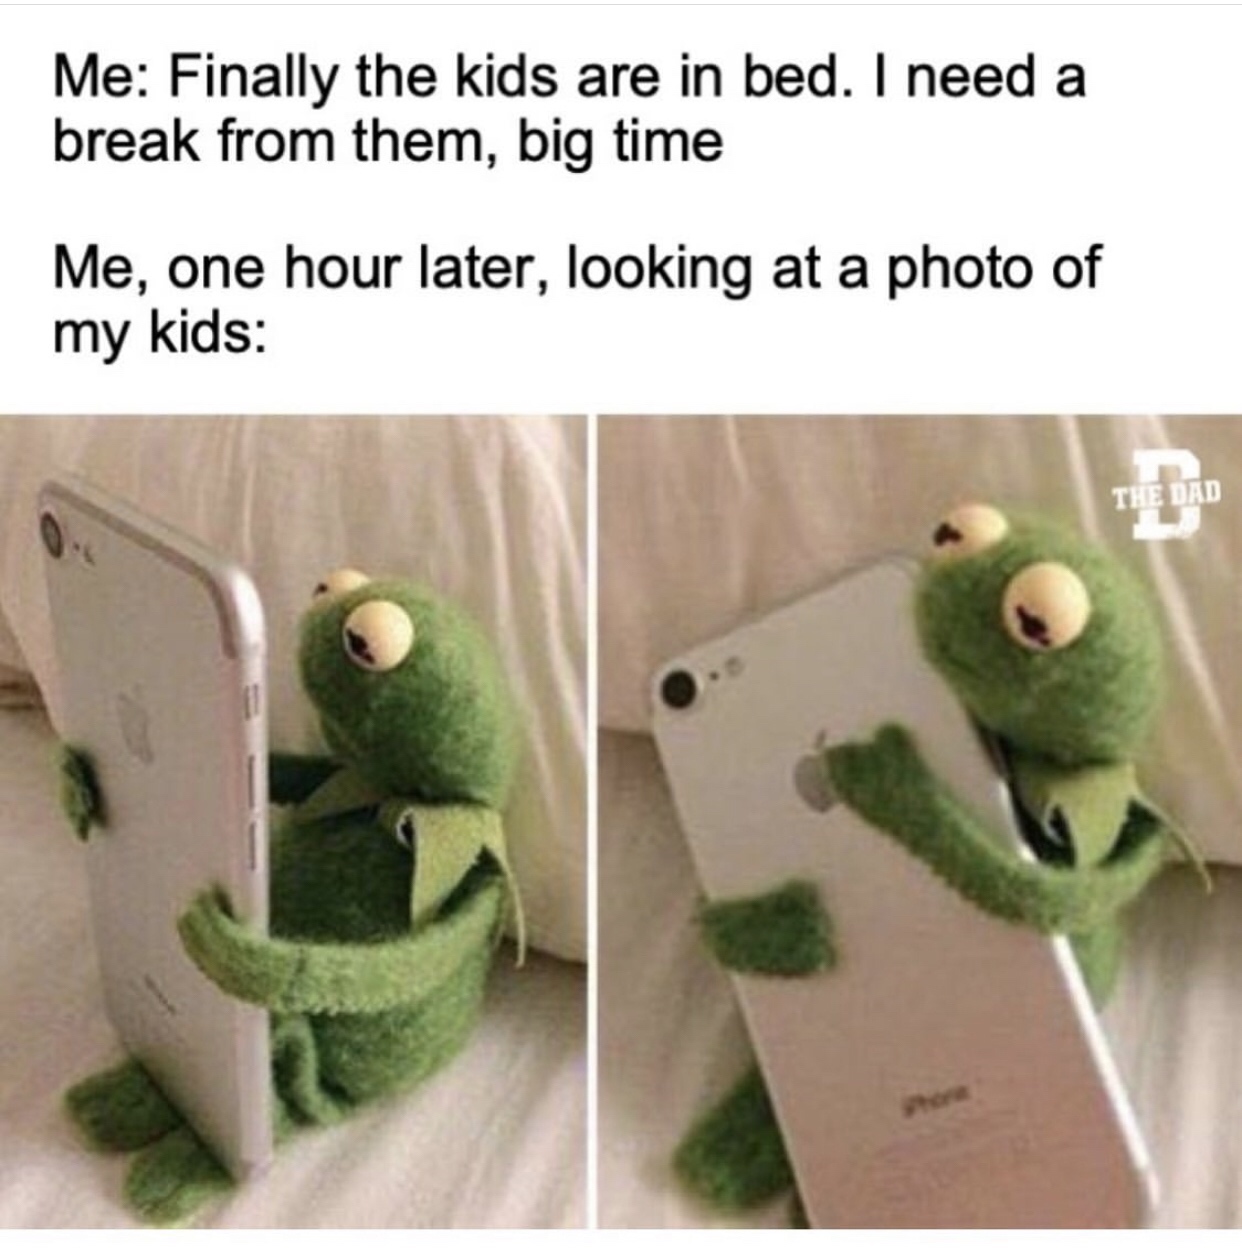 meme i need a break from my kids - Me Finally the kids are in bed. I need a break from them, big time Me, one hour later, looking at a photo of my kids The Dad